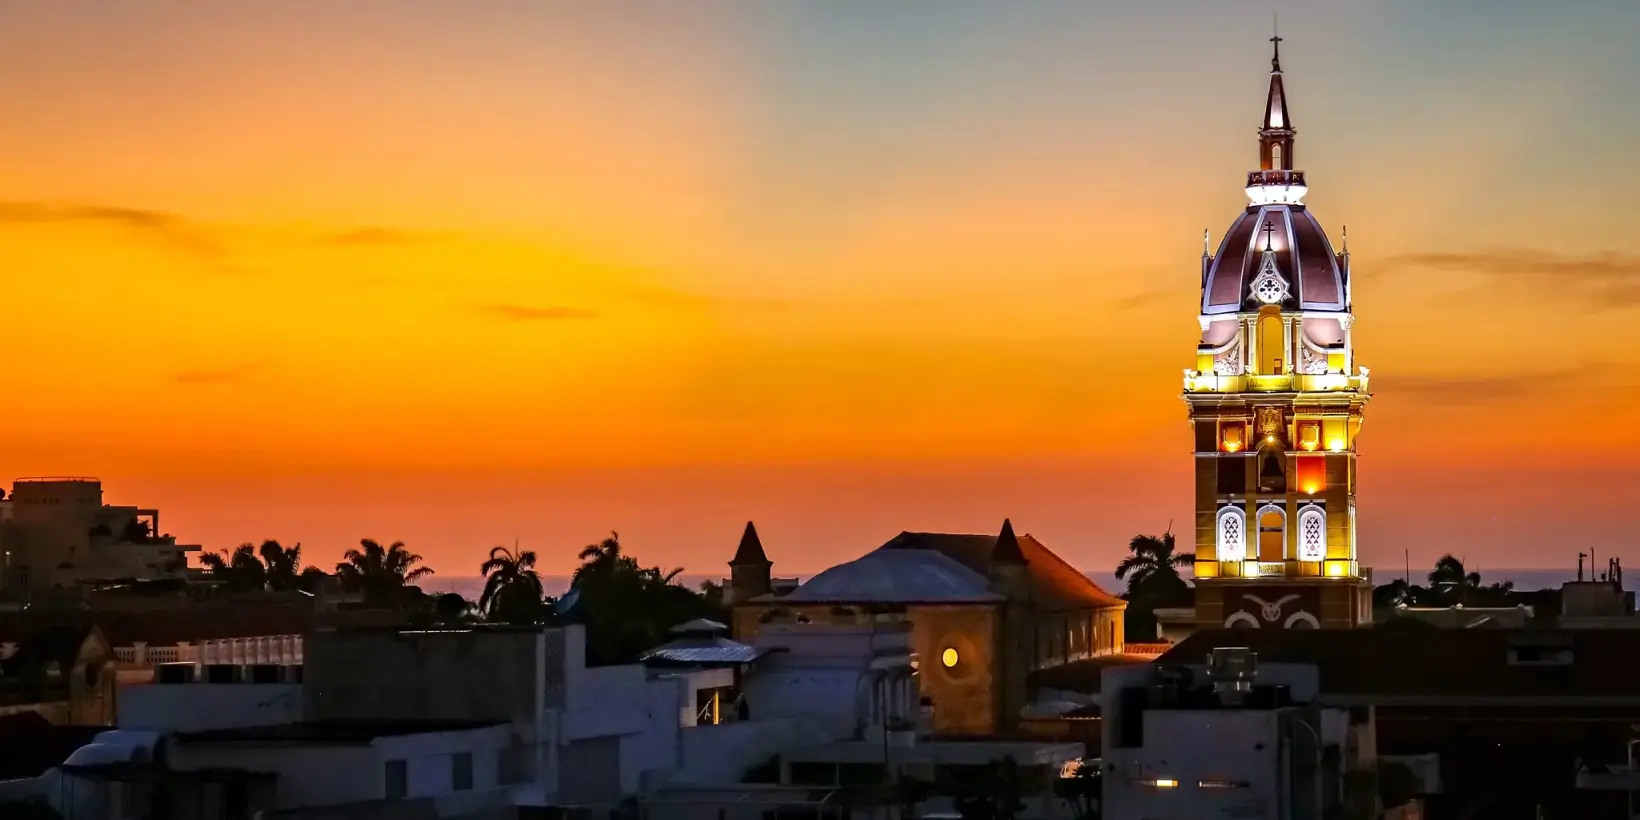 Wonderful view after sunset over Cartagena with illuminated Cartagena Cathedral against orange-yellow sky